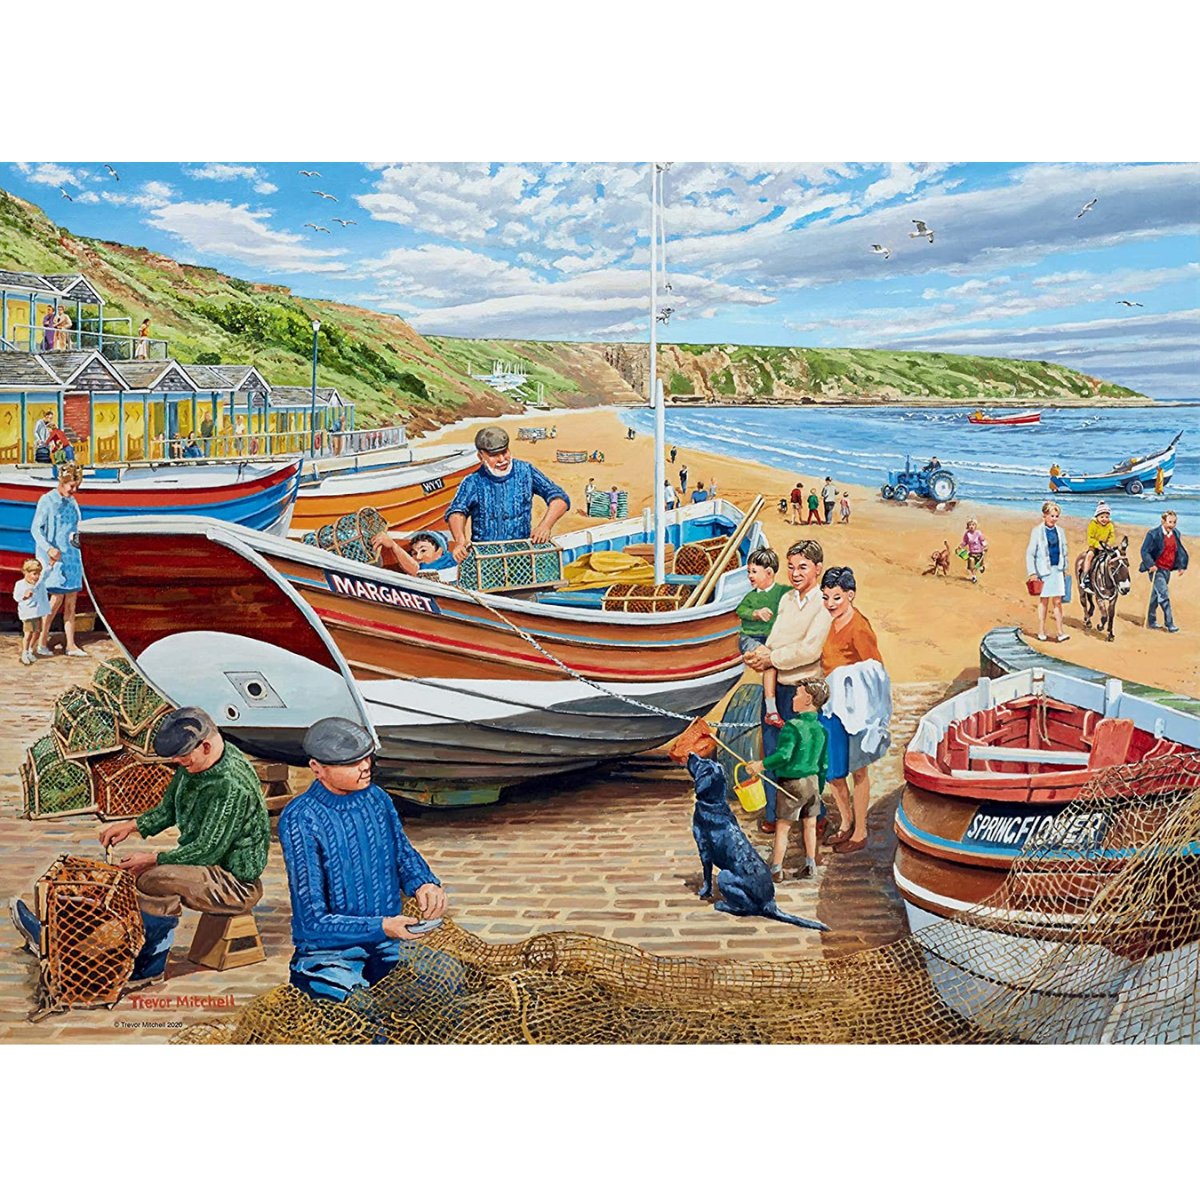 Ravensburger Happy Days at Work, The Fisherman 500 Piece Jigsaw Puzzle - Phillips Hobbies